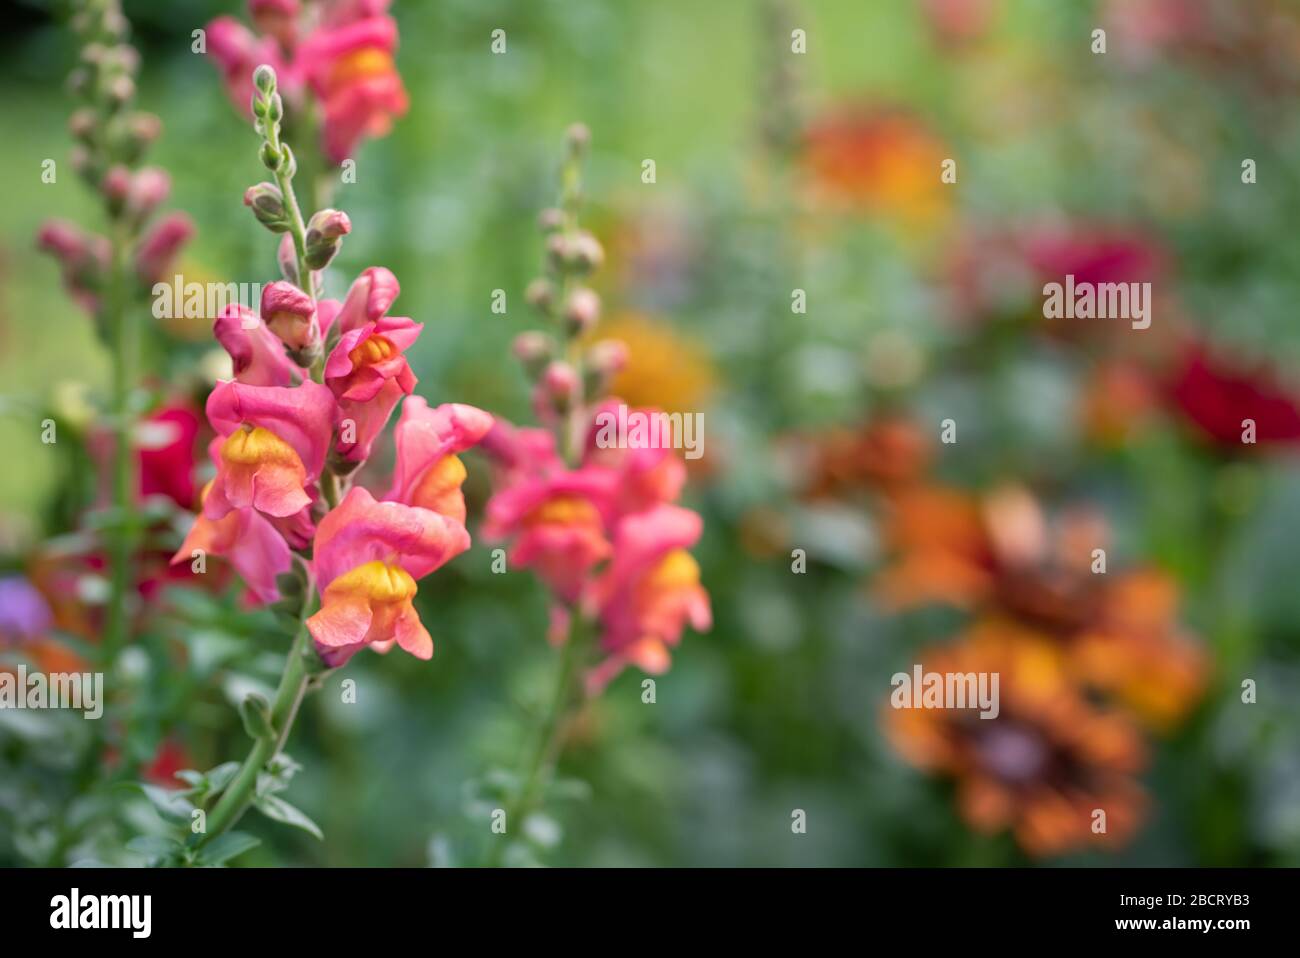 Purple flowers of antirrhinum or dragon flowers or snapdragons in a green flowers garden Stock Photo